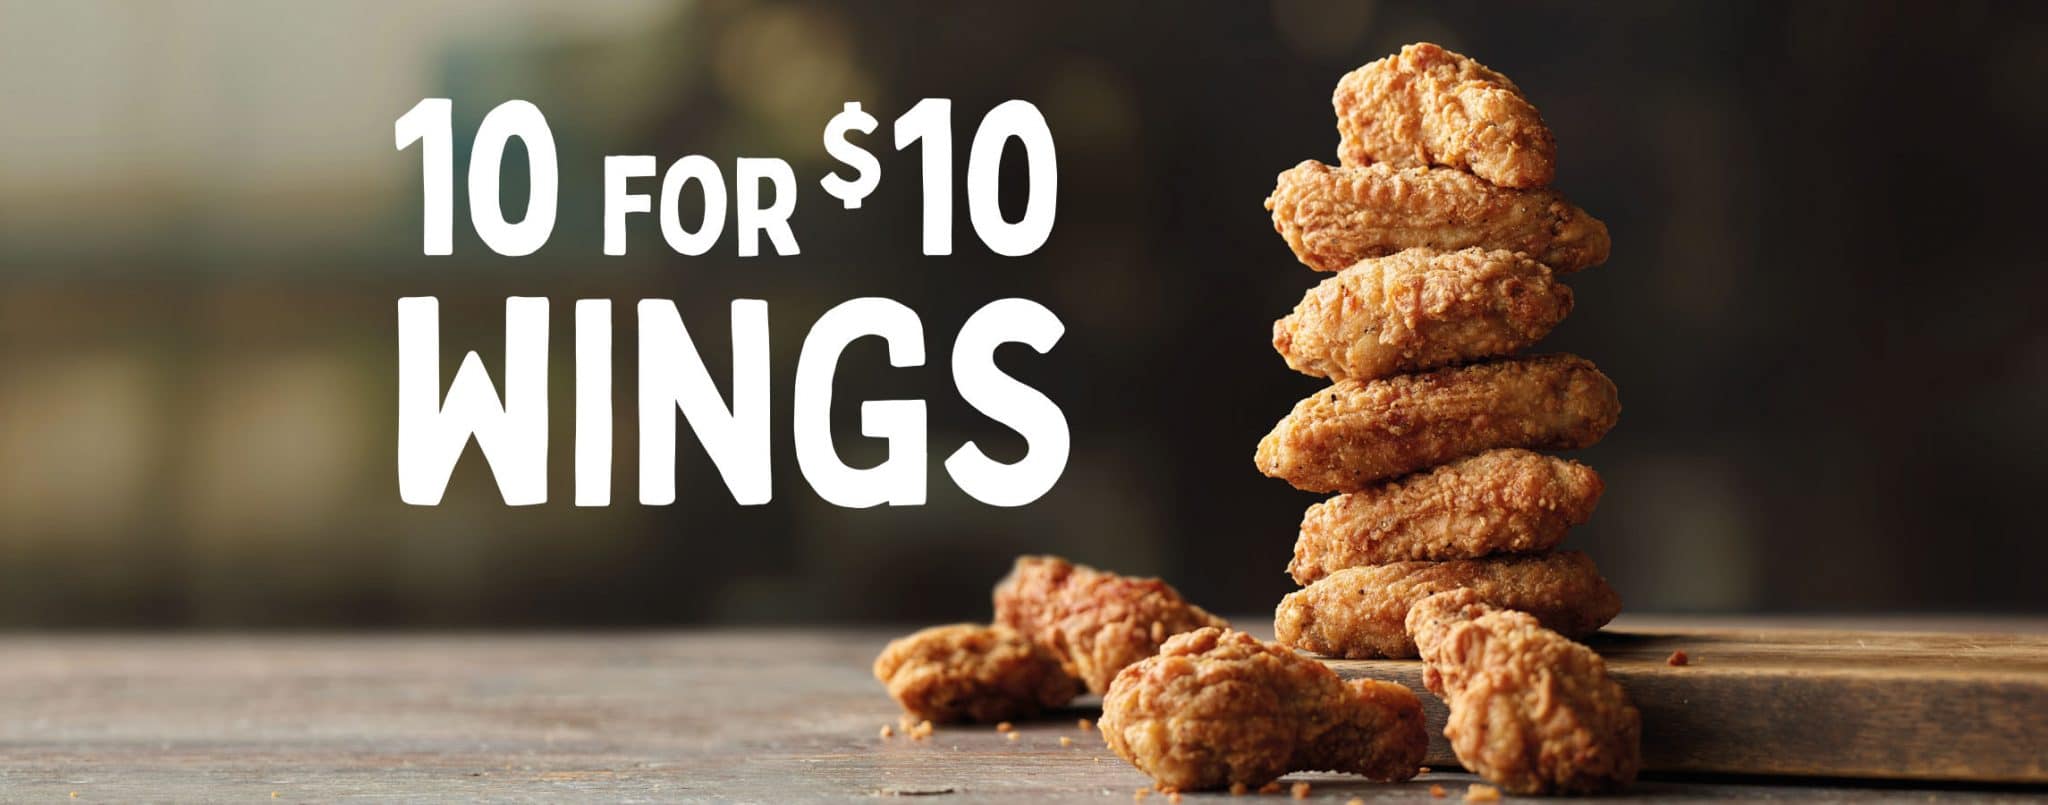 10 Wings for $10